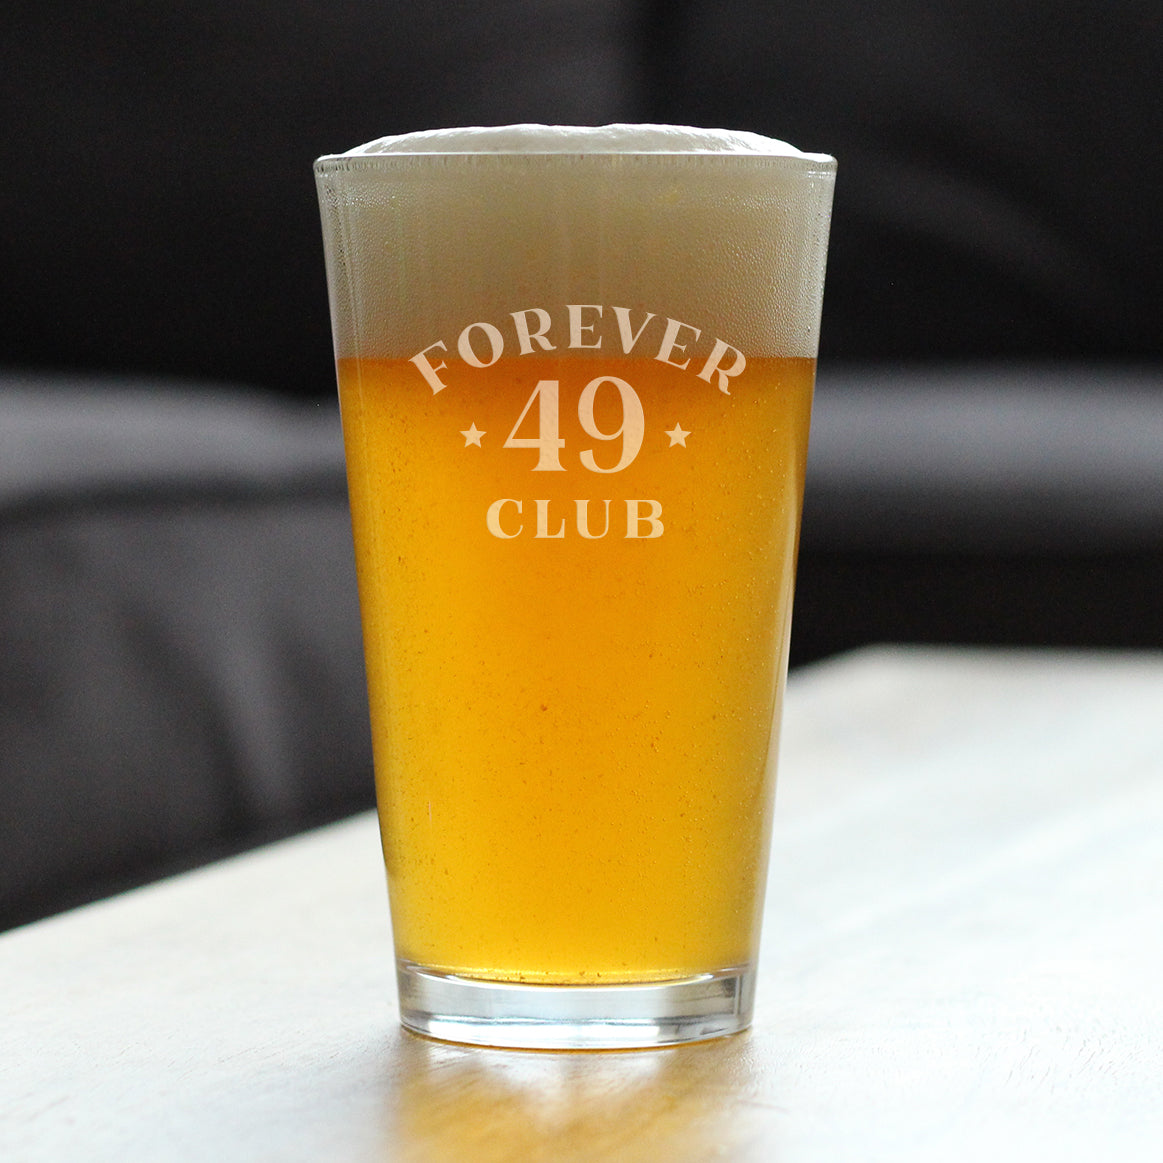 Forever 49 Club - Pint Glass for Beer 50th Birthday Gifts for Women &amp; Men Turning 50 - Fun Bday Party Decor - 16 Oz